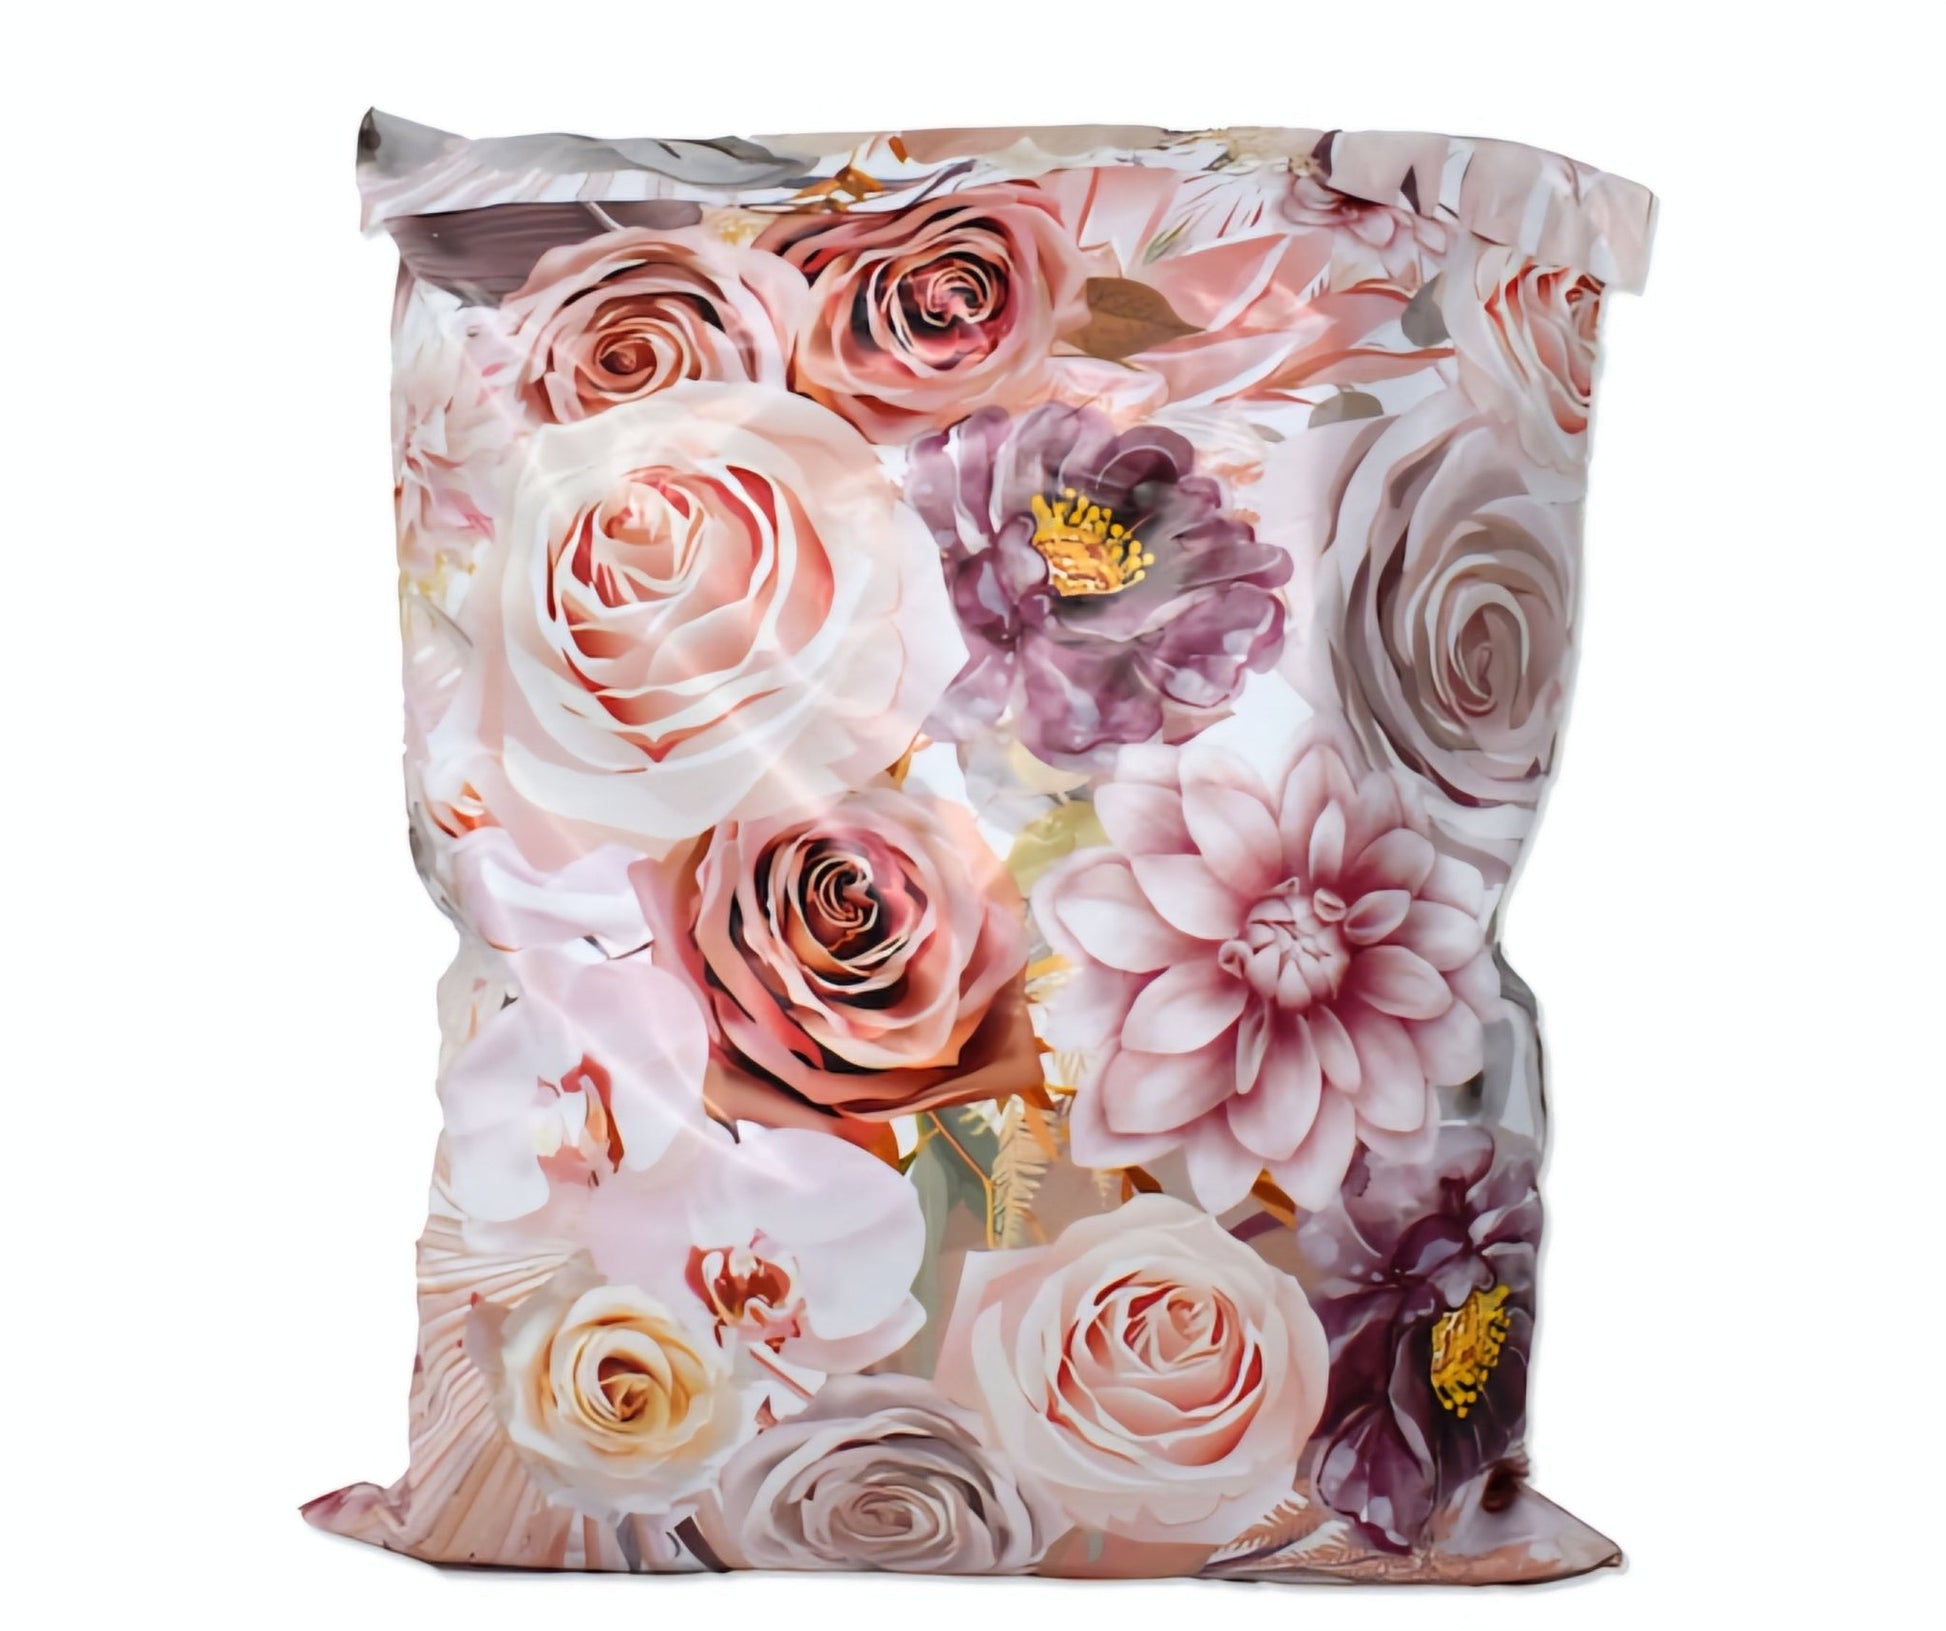 Boho Flowers & Roses Poly Mailers Size 19x24 Colorful Shipping Bags - Shipping In Style